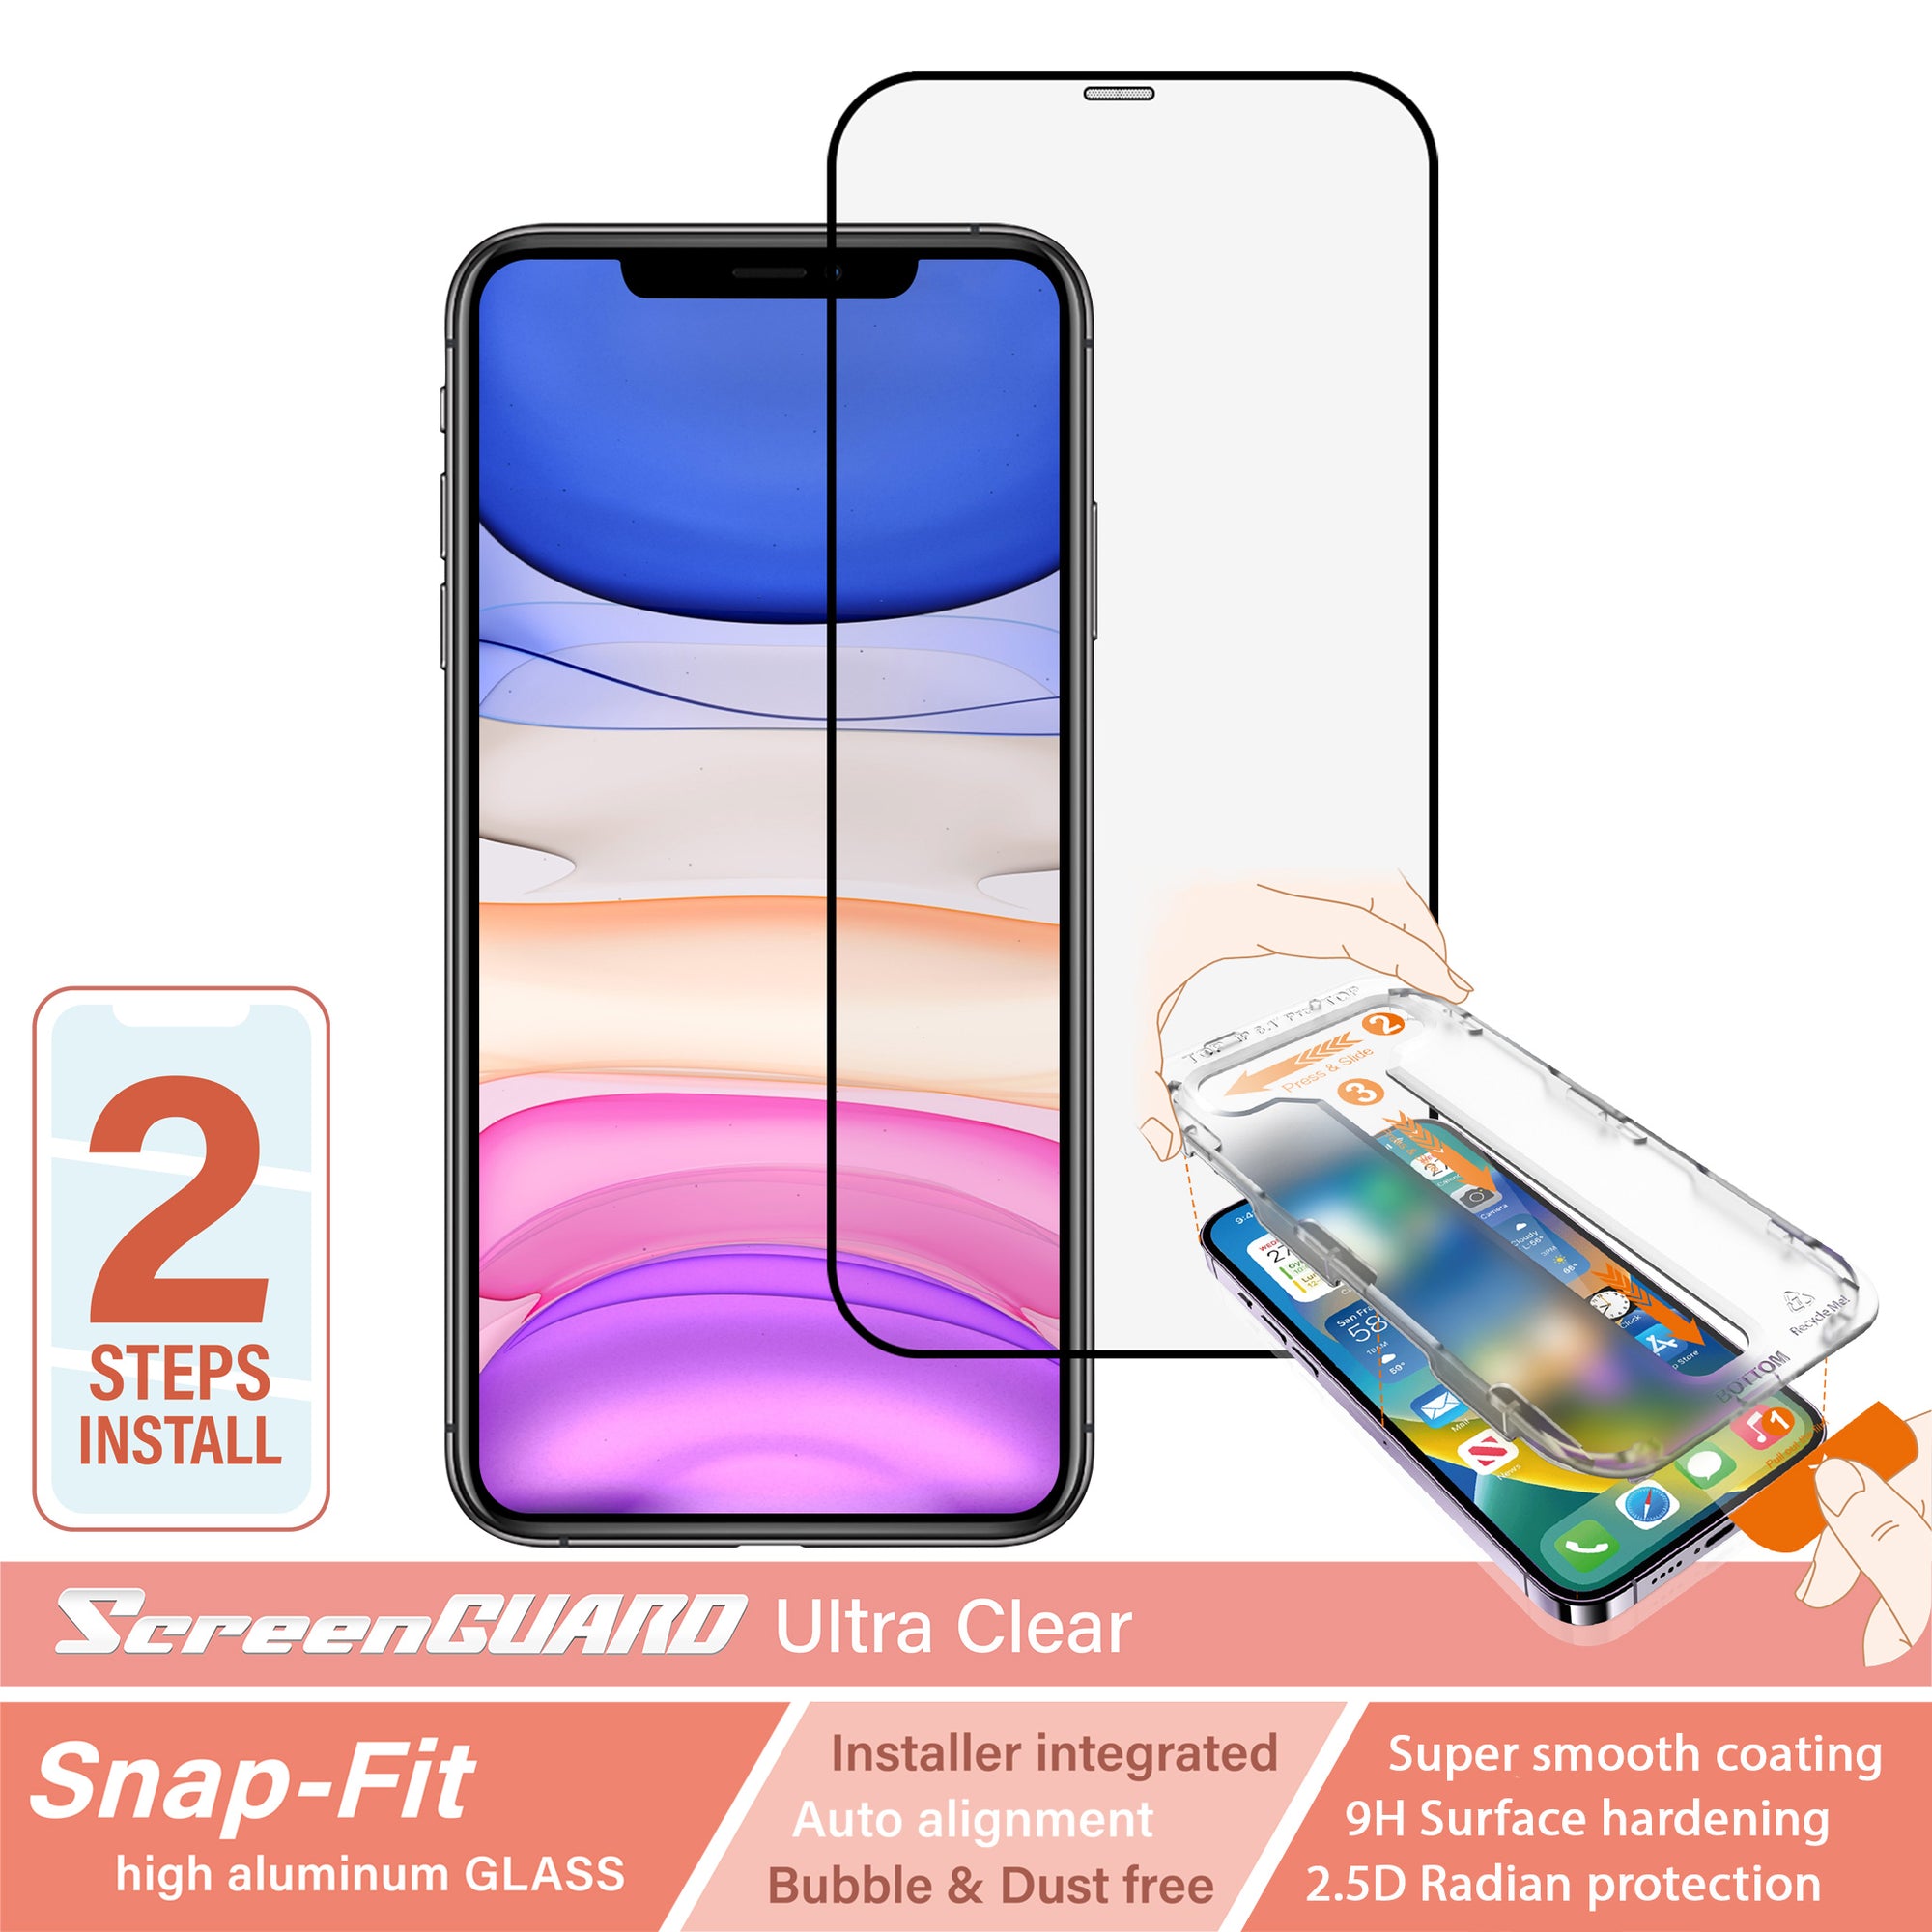 iPhone 11 Pro SnapFit High Aluminum Glass Ultra Clear Screen Protector